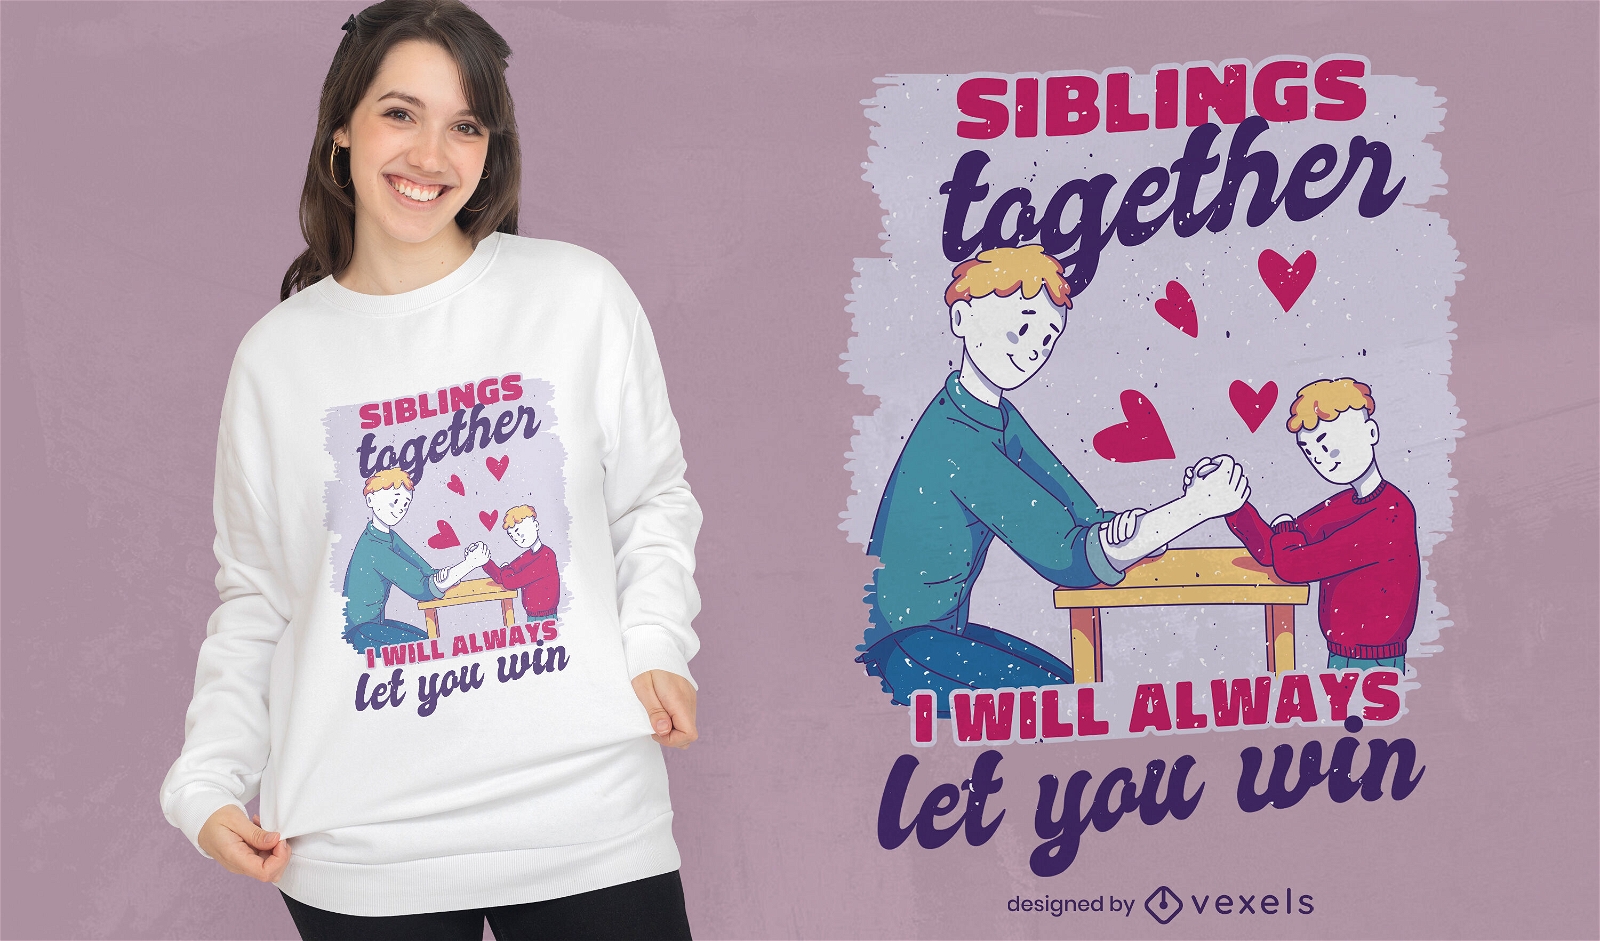 Siblings together brothers t-shirt design